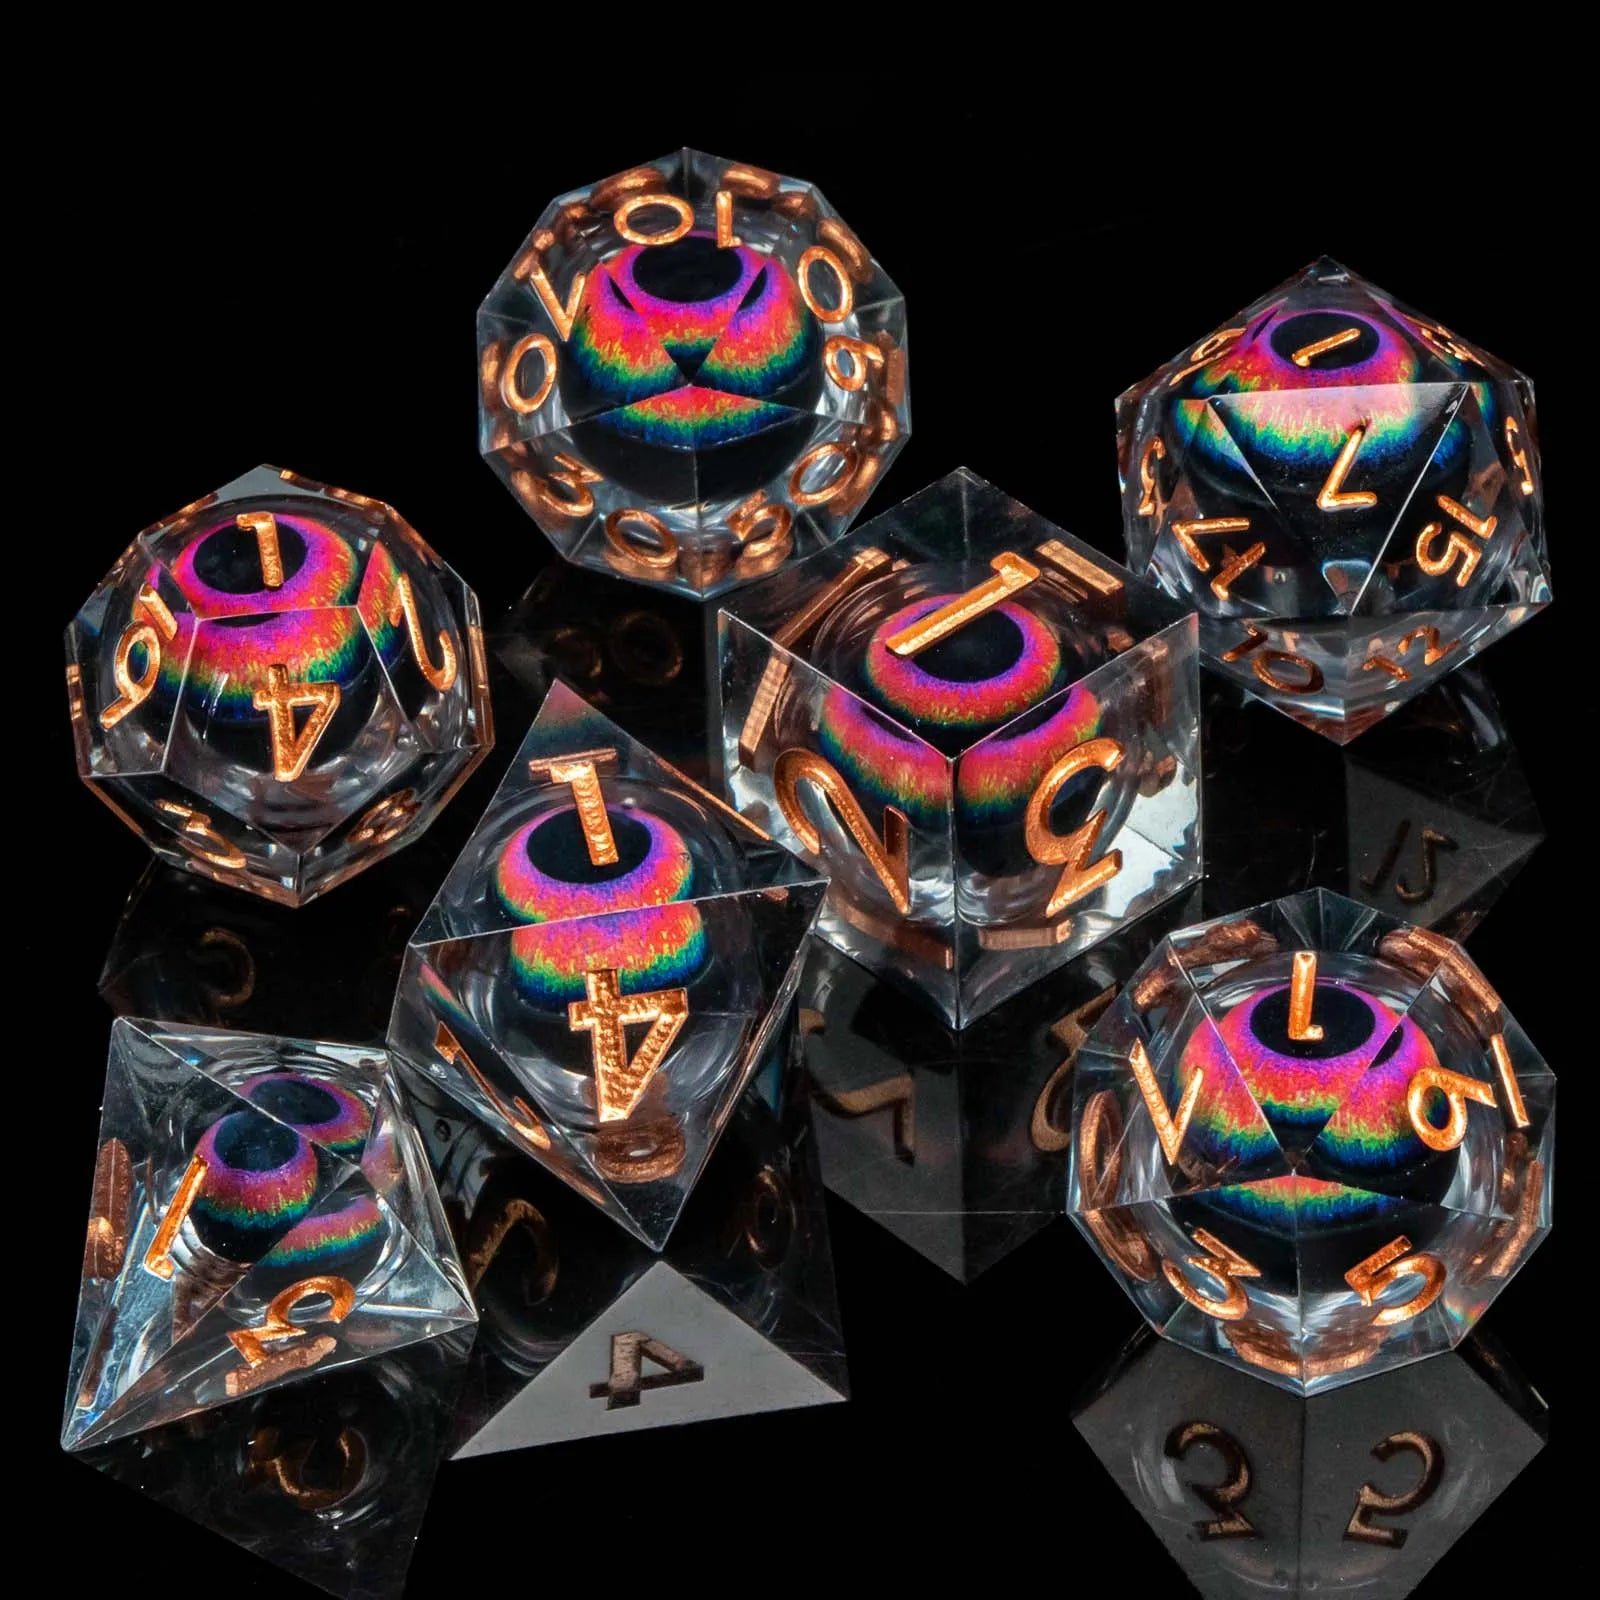 D and D Flowing Sand Sharp Edge Dragon Eye Dnd Resin RPG Polyhedral D&D Dice Set For Dungeon and Dragon Pathfinder Role Playing AZ09